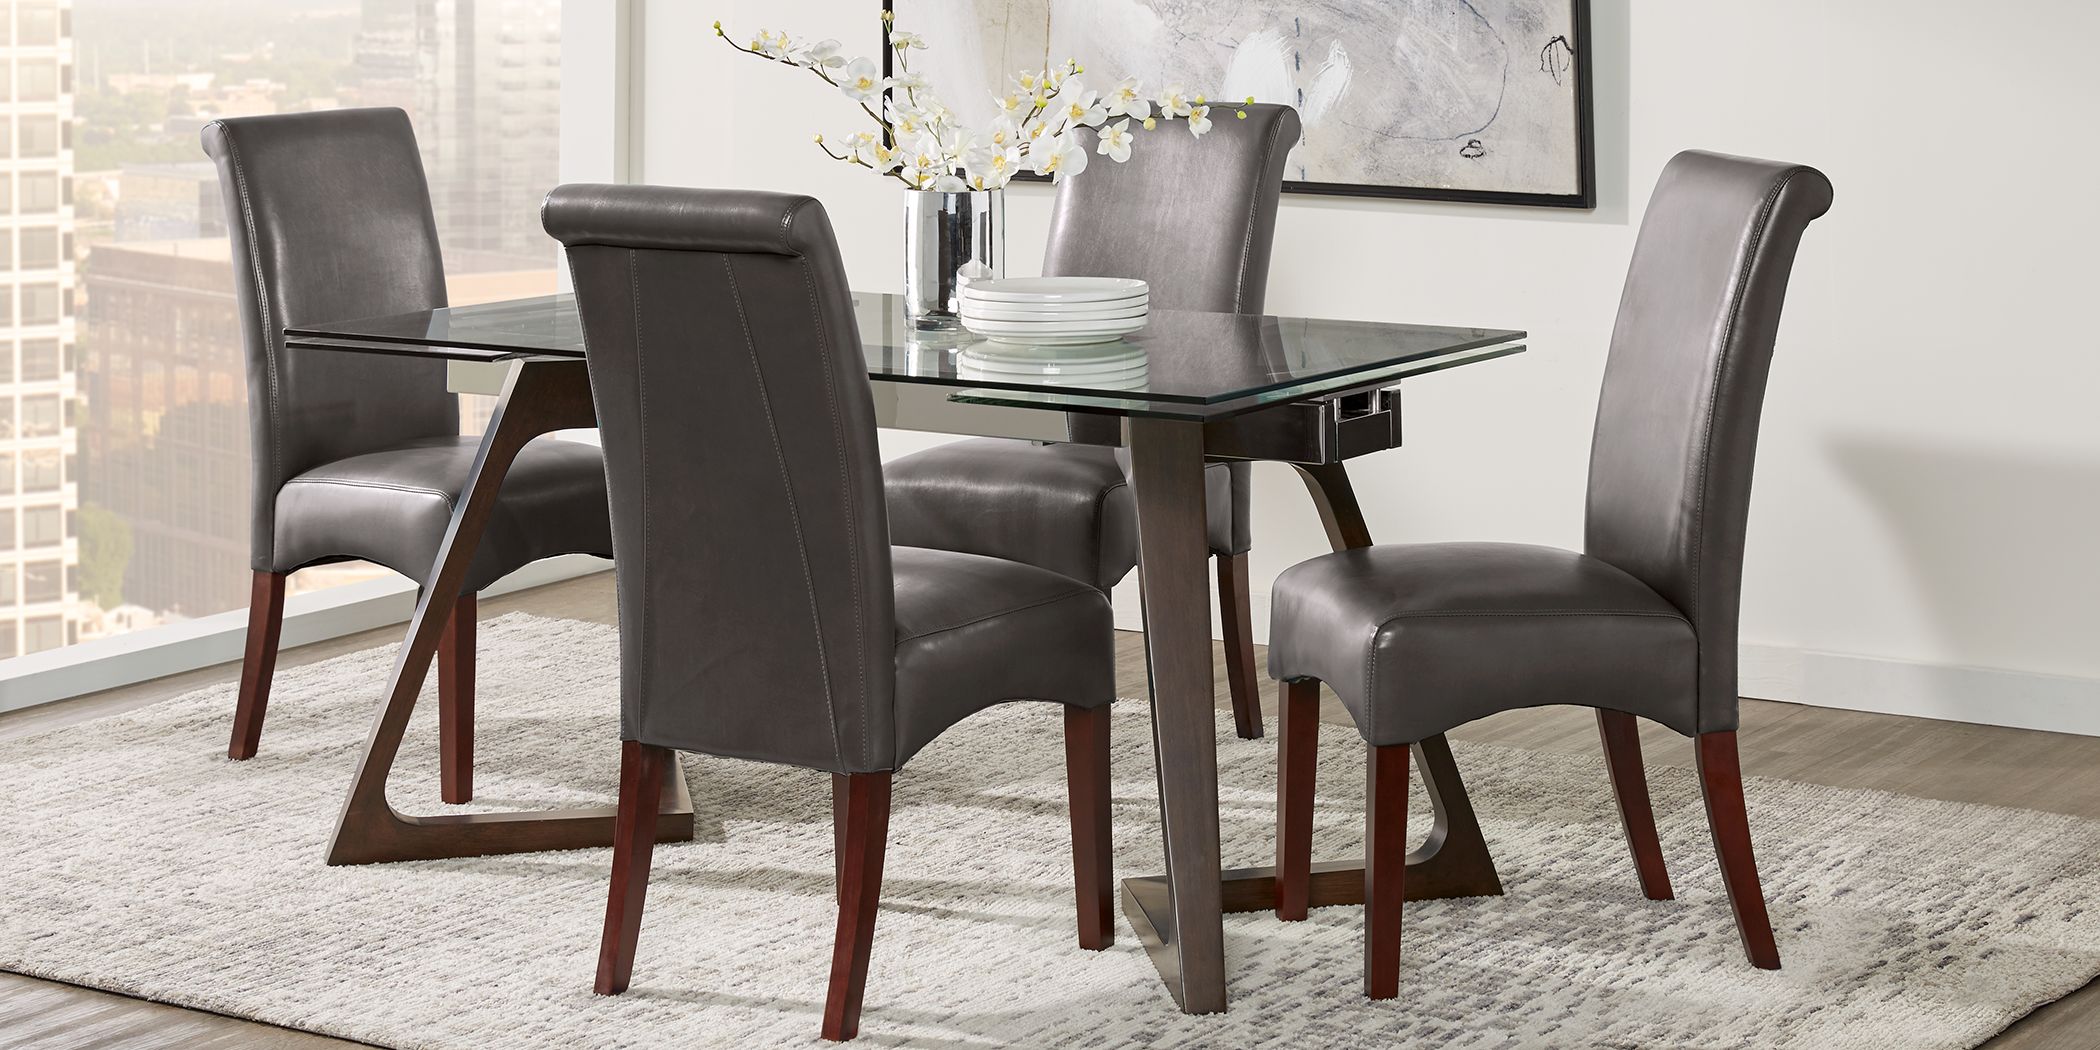 Amhearst Brown 5 Pc Rectangle Dining Set with Charcoal Chairs - Rooms To Go